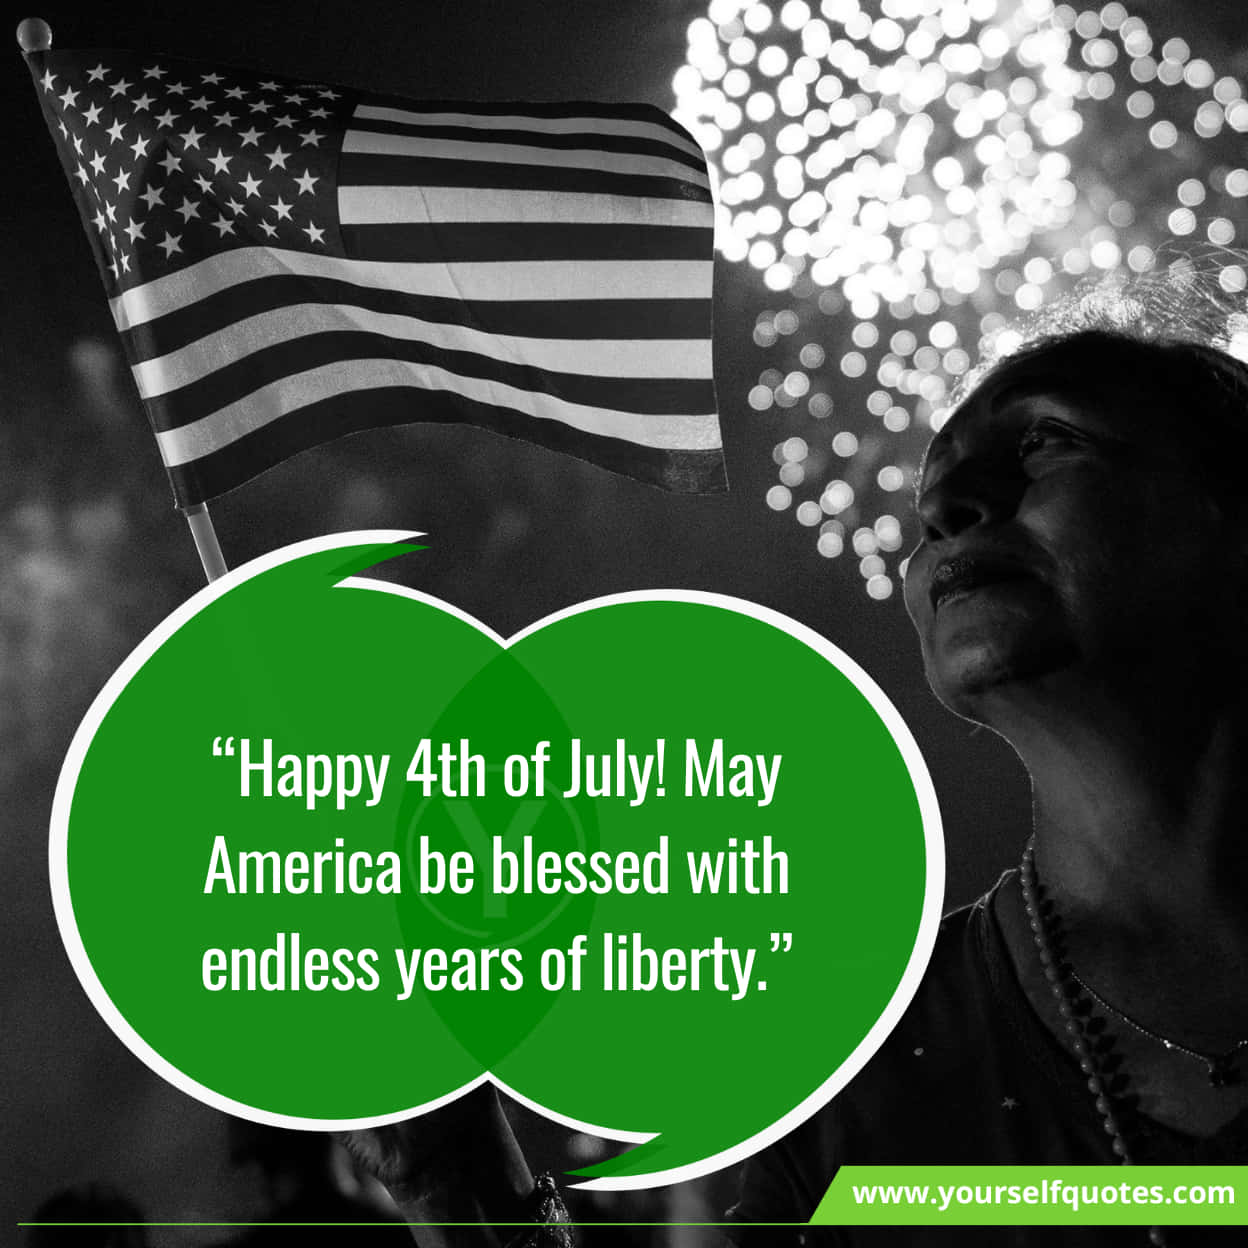 Happy 4th of July Wishes, Messages and Quotes...